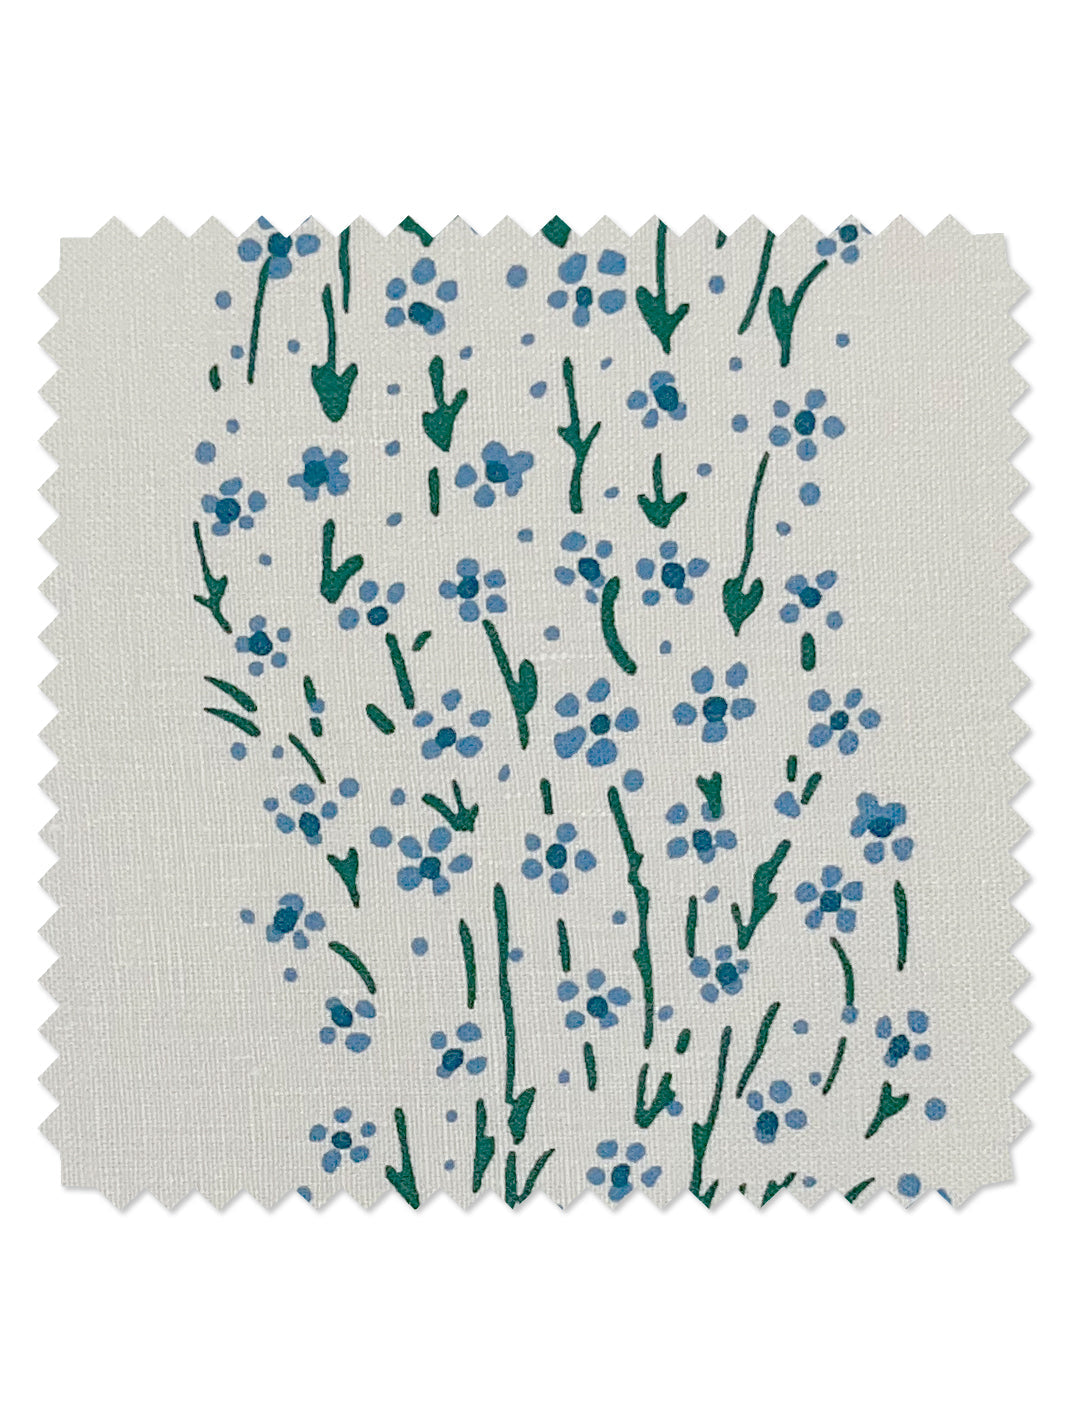 'Hillhouse Bouquet Multi' Linen Fabric by Nathan Turner - Blue Green